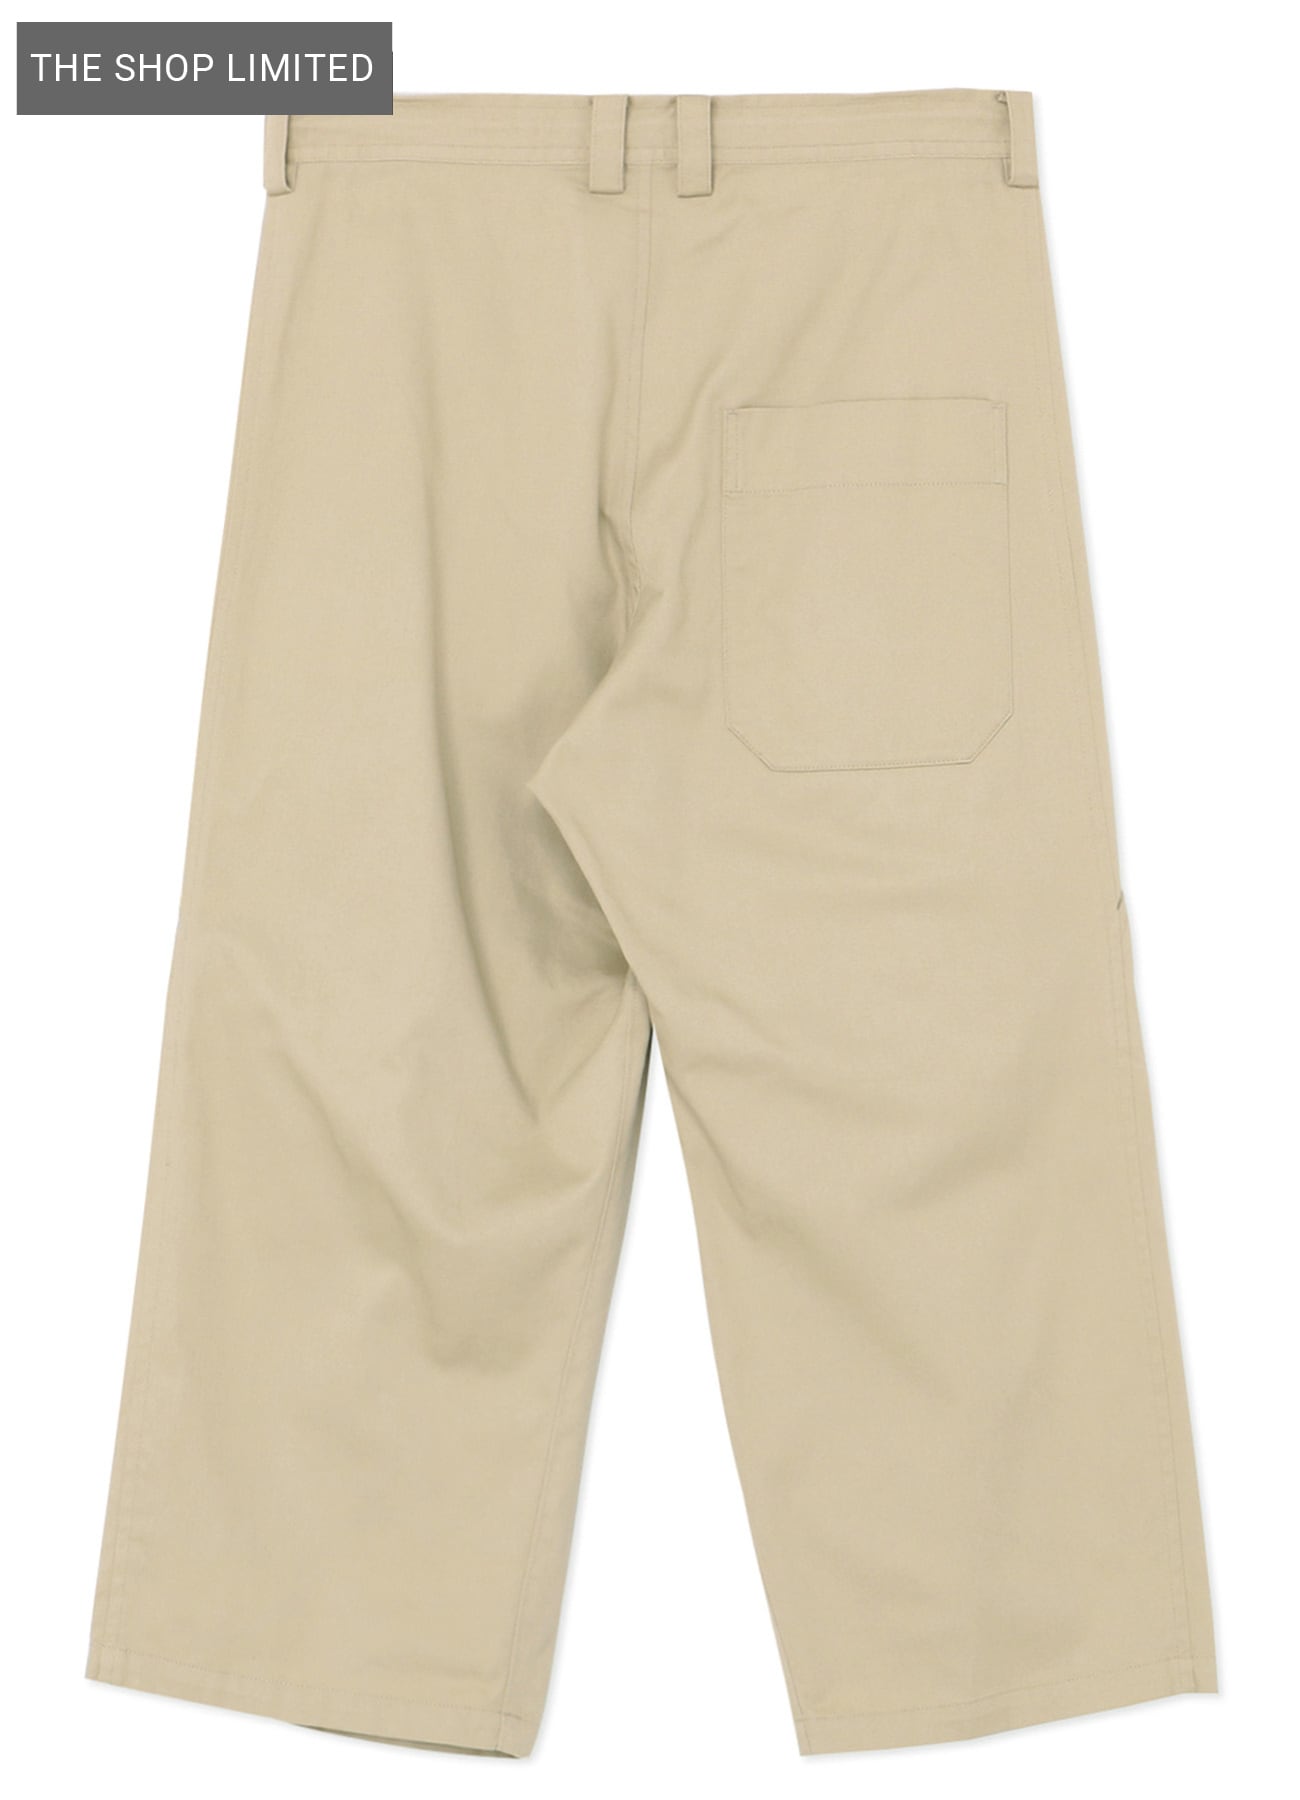 Y's BORN PRODUCT] COTTON TWILL LONG POCKET PANTS(XS Beige): Y's 